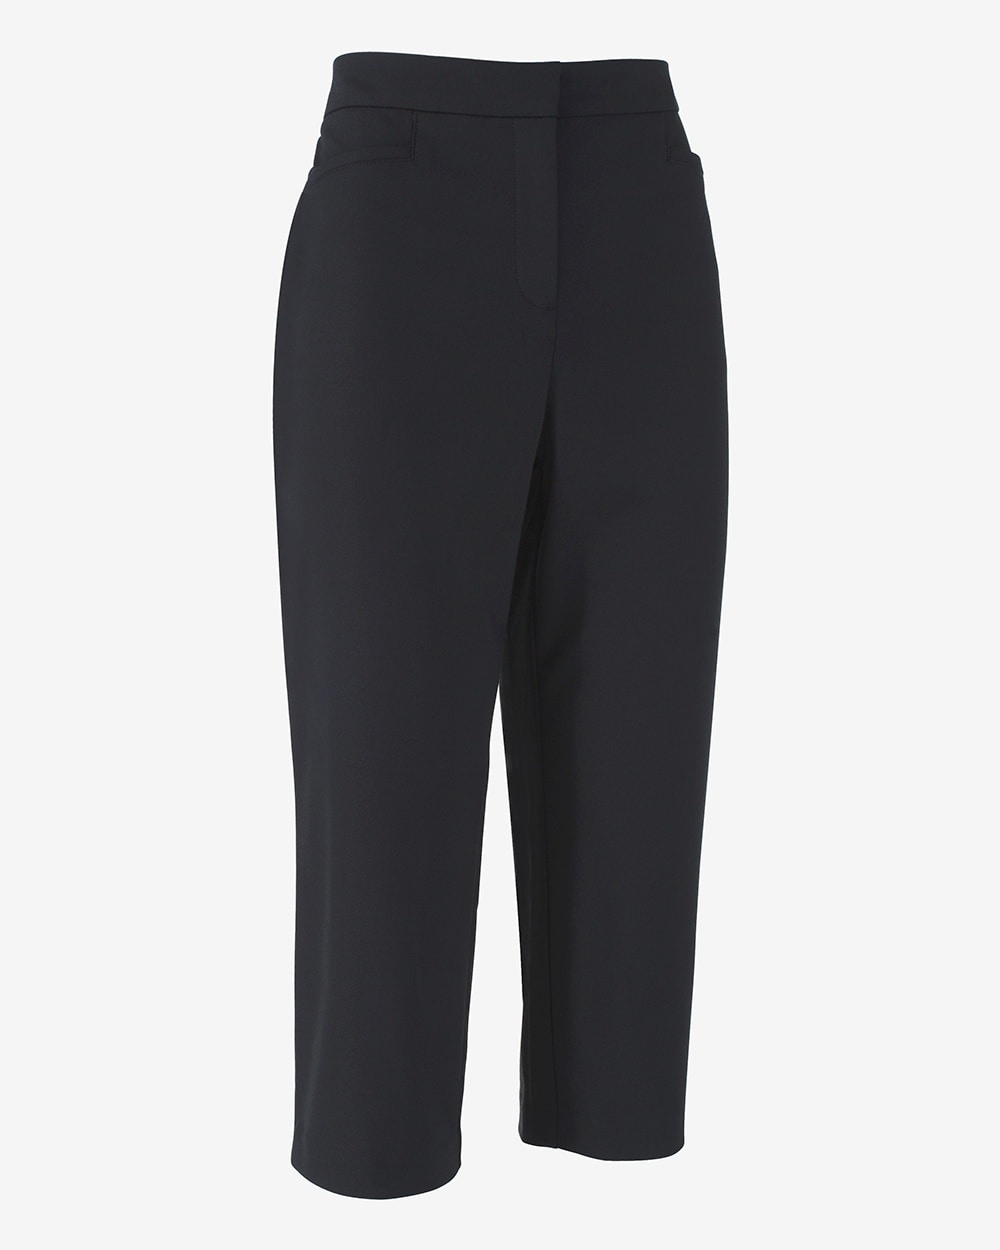 Fabulously Slimming Straight Capris